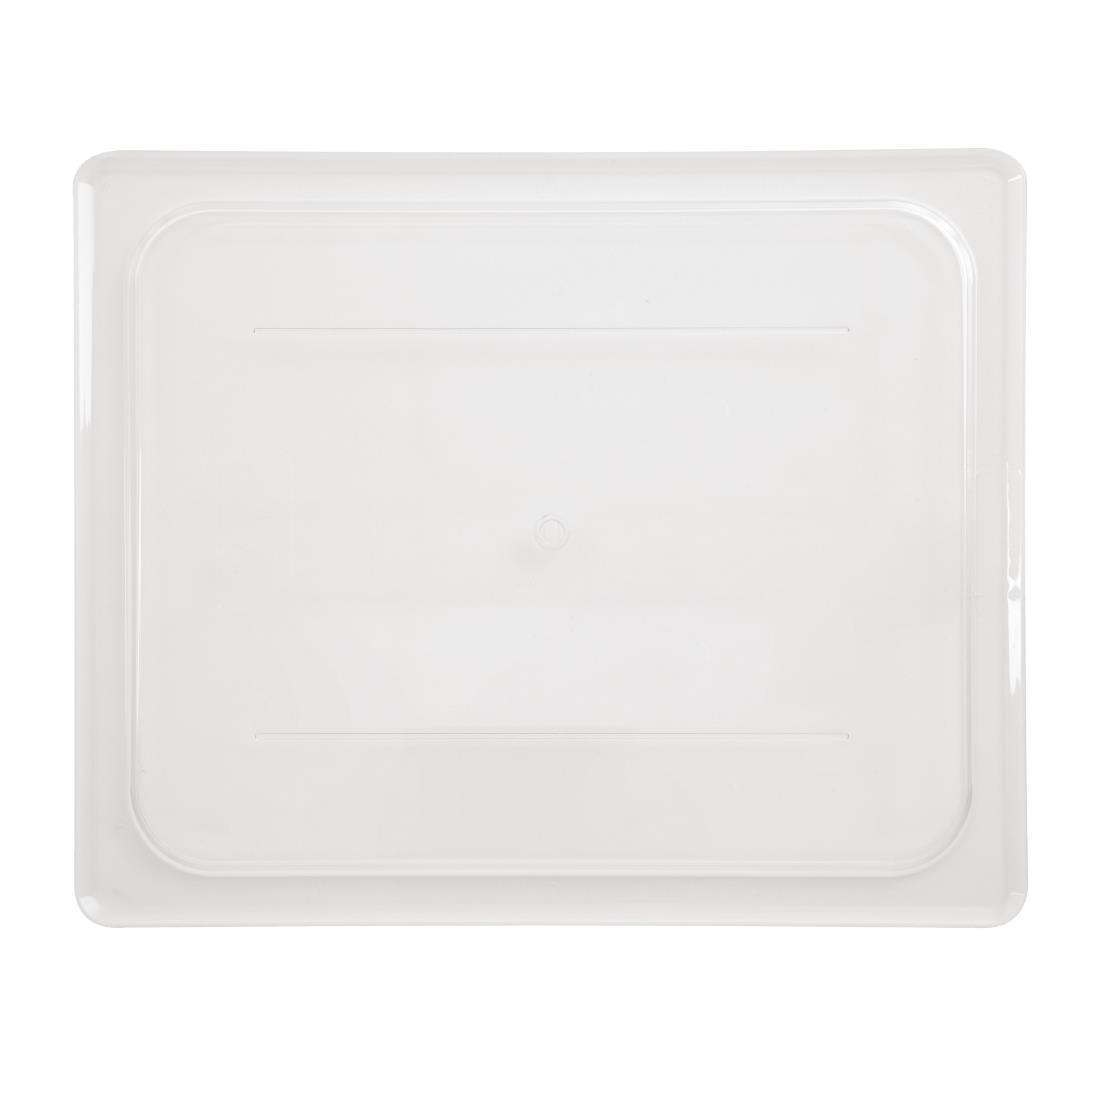 Cambro Clear Polycarbonate 1/2 Gastronorm Lid - DC663  - 4